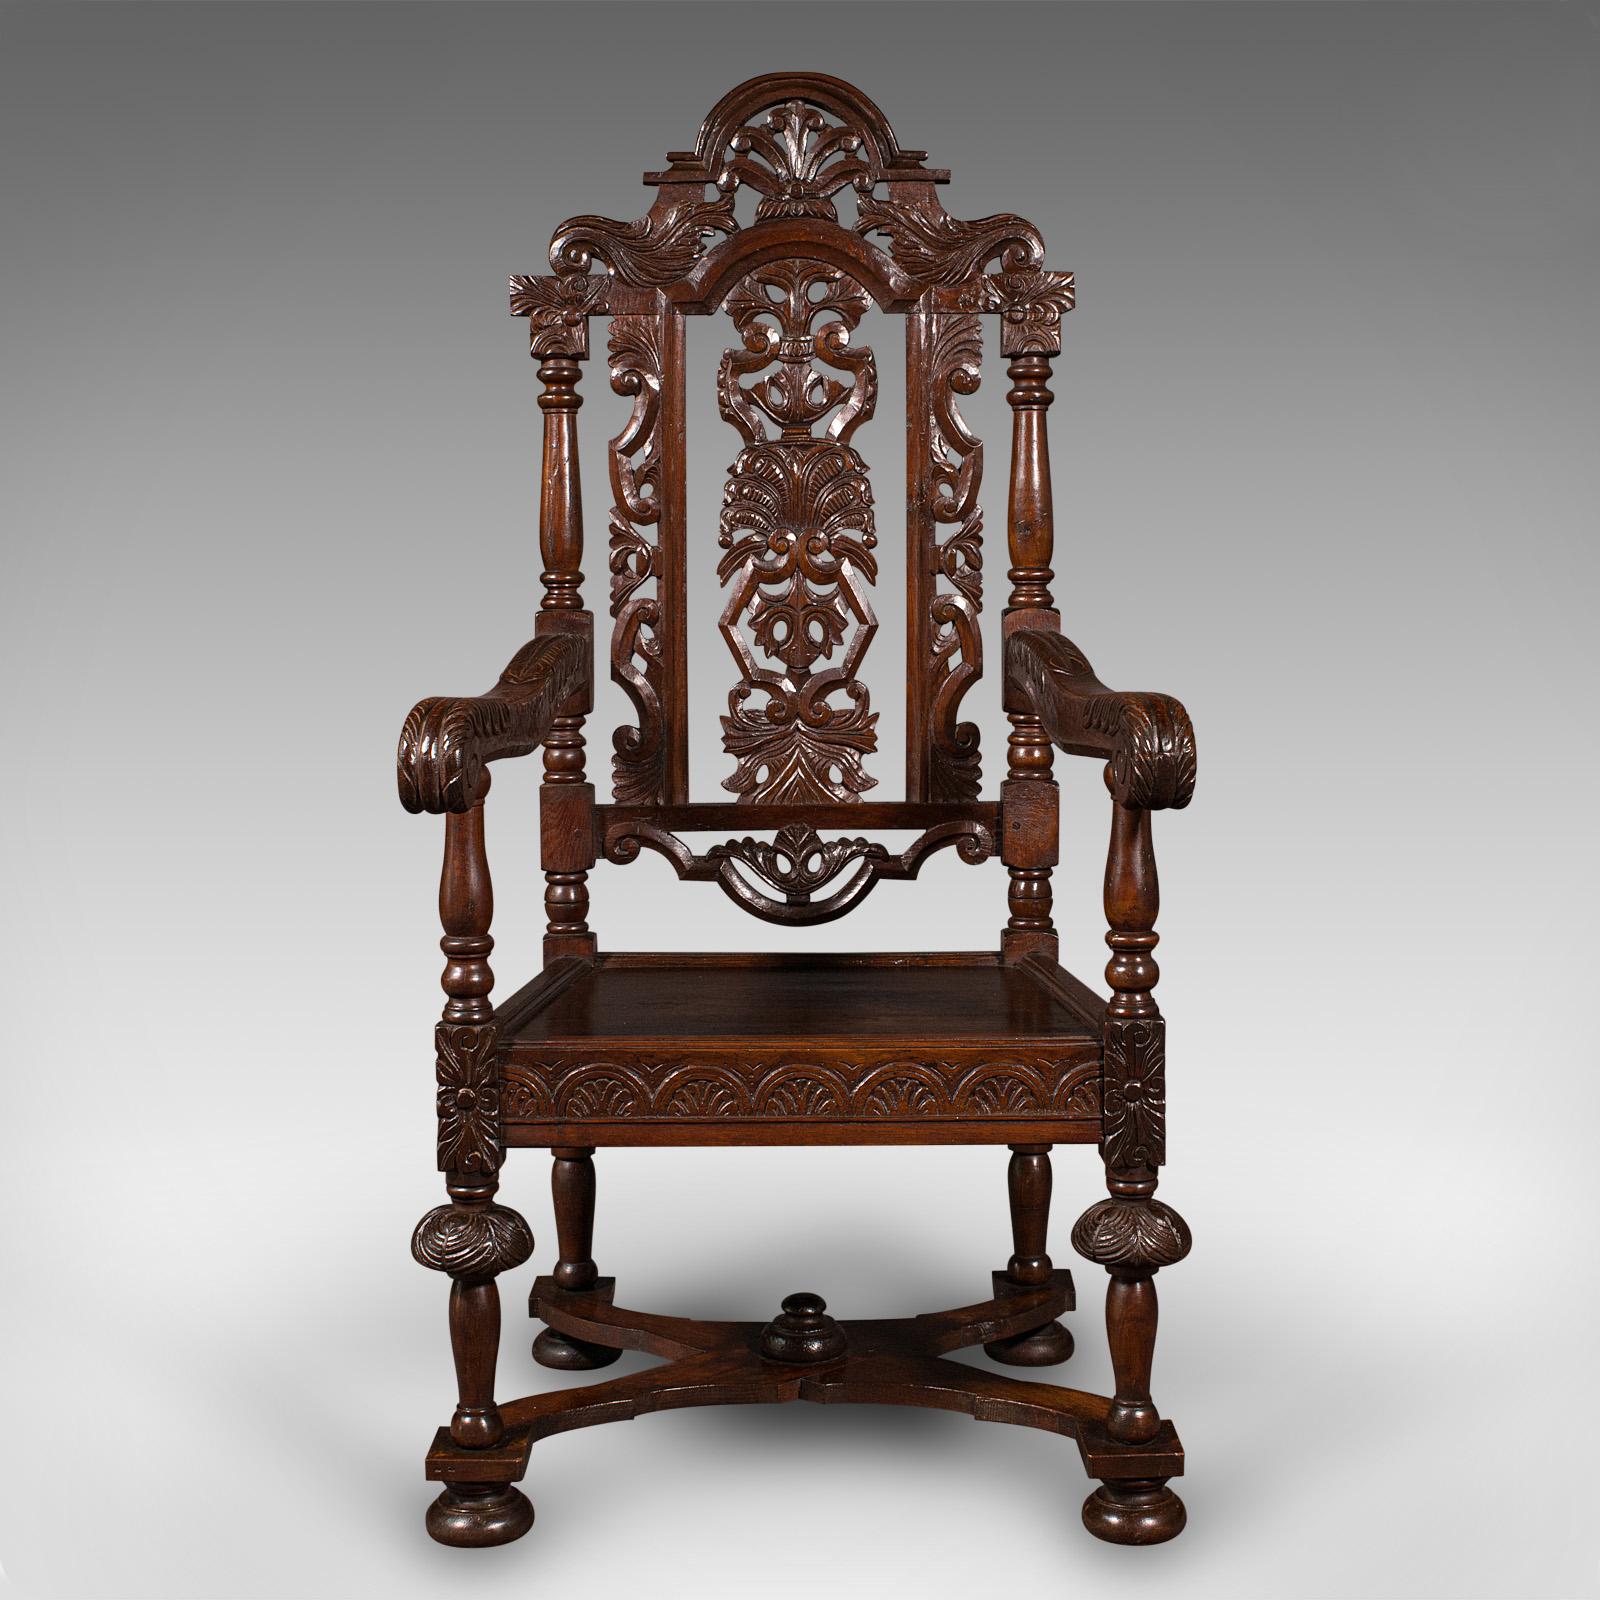 This is an antique carved throne chair. A Scottish, oak carver elbow chair with Gothic Revival taste, dating to the Victorian period, circa 1890.

Delightfully carved chair, with distinguished Gothic motif throughout
Displays a desirable aged